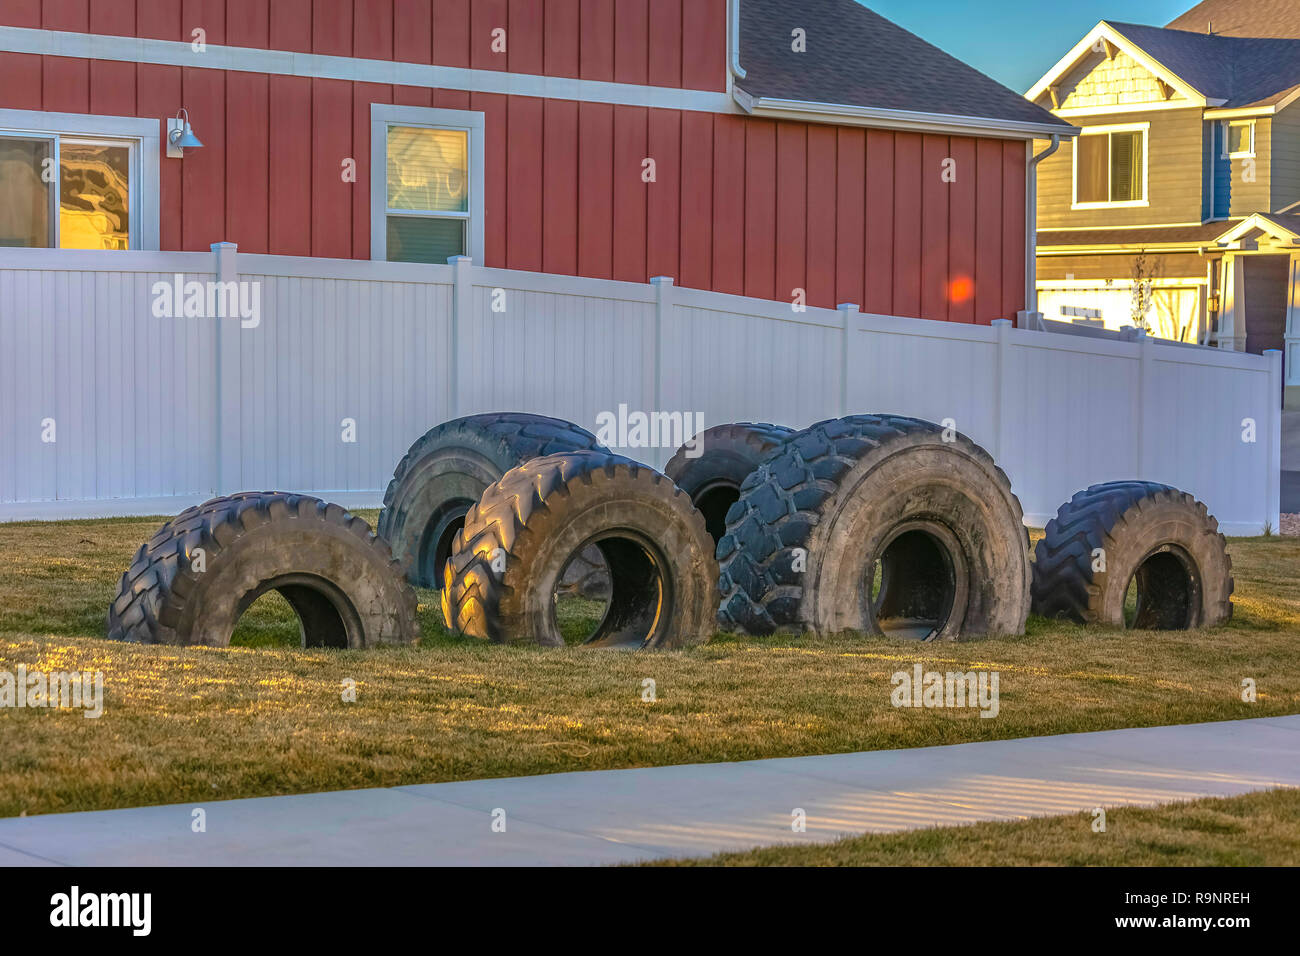 Tires recycled into small playground for children Stock Photo